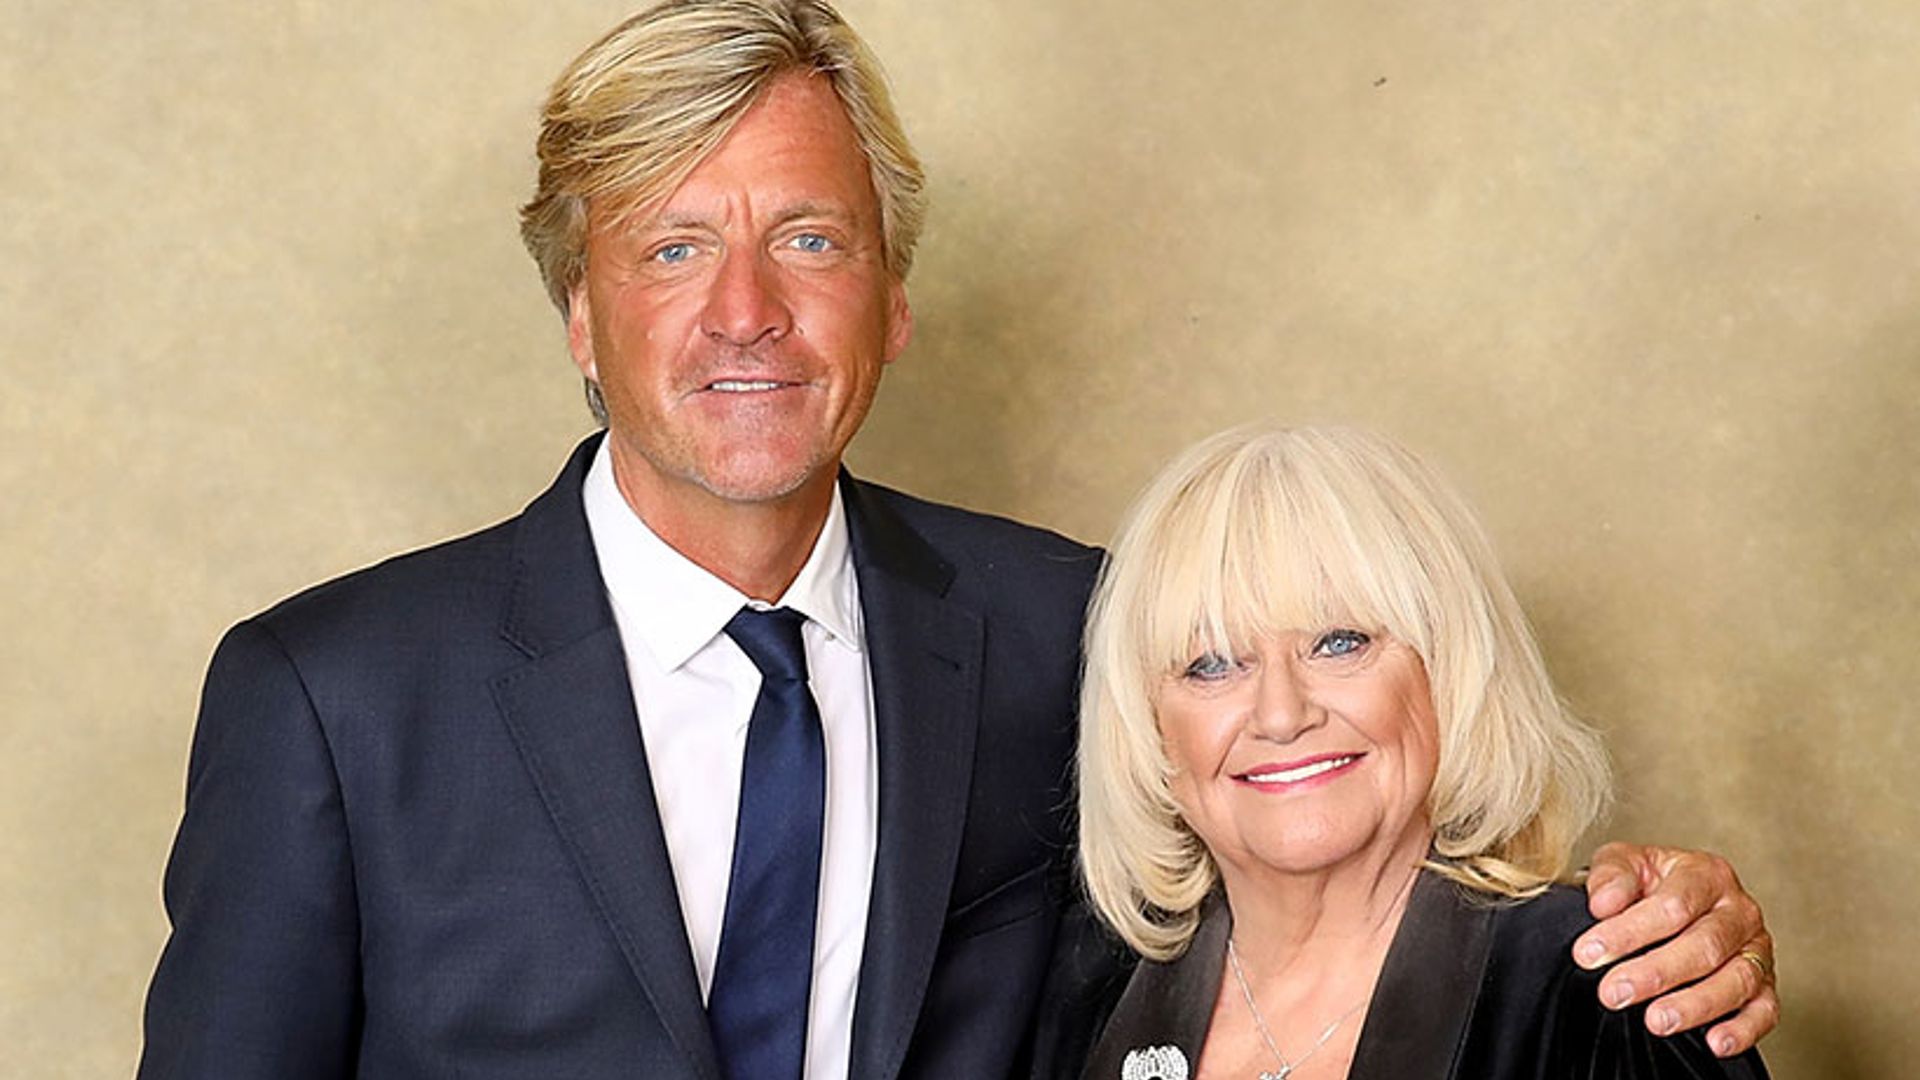 Richard Madeley opens up about wife Judy Finnigan's heartbreaking stillbirth